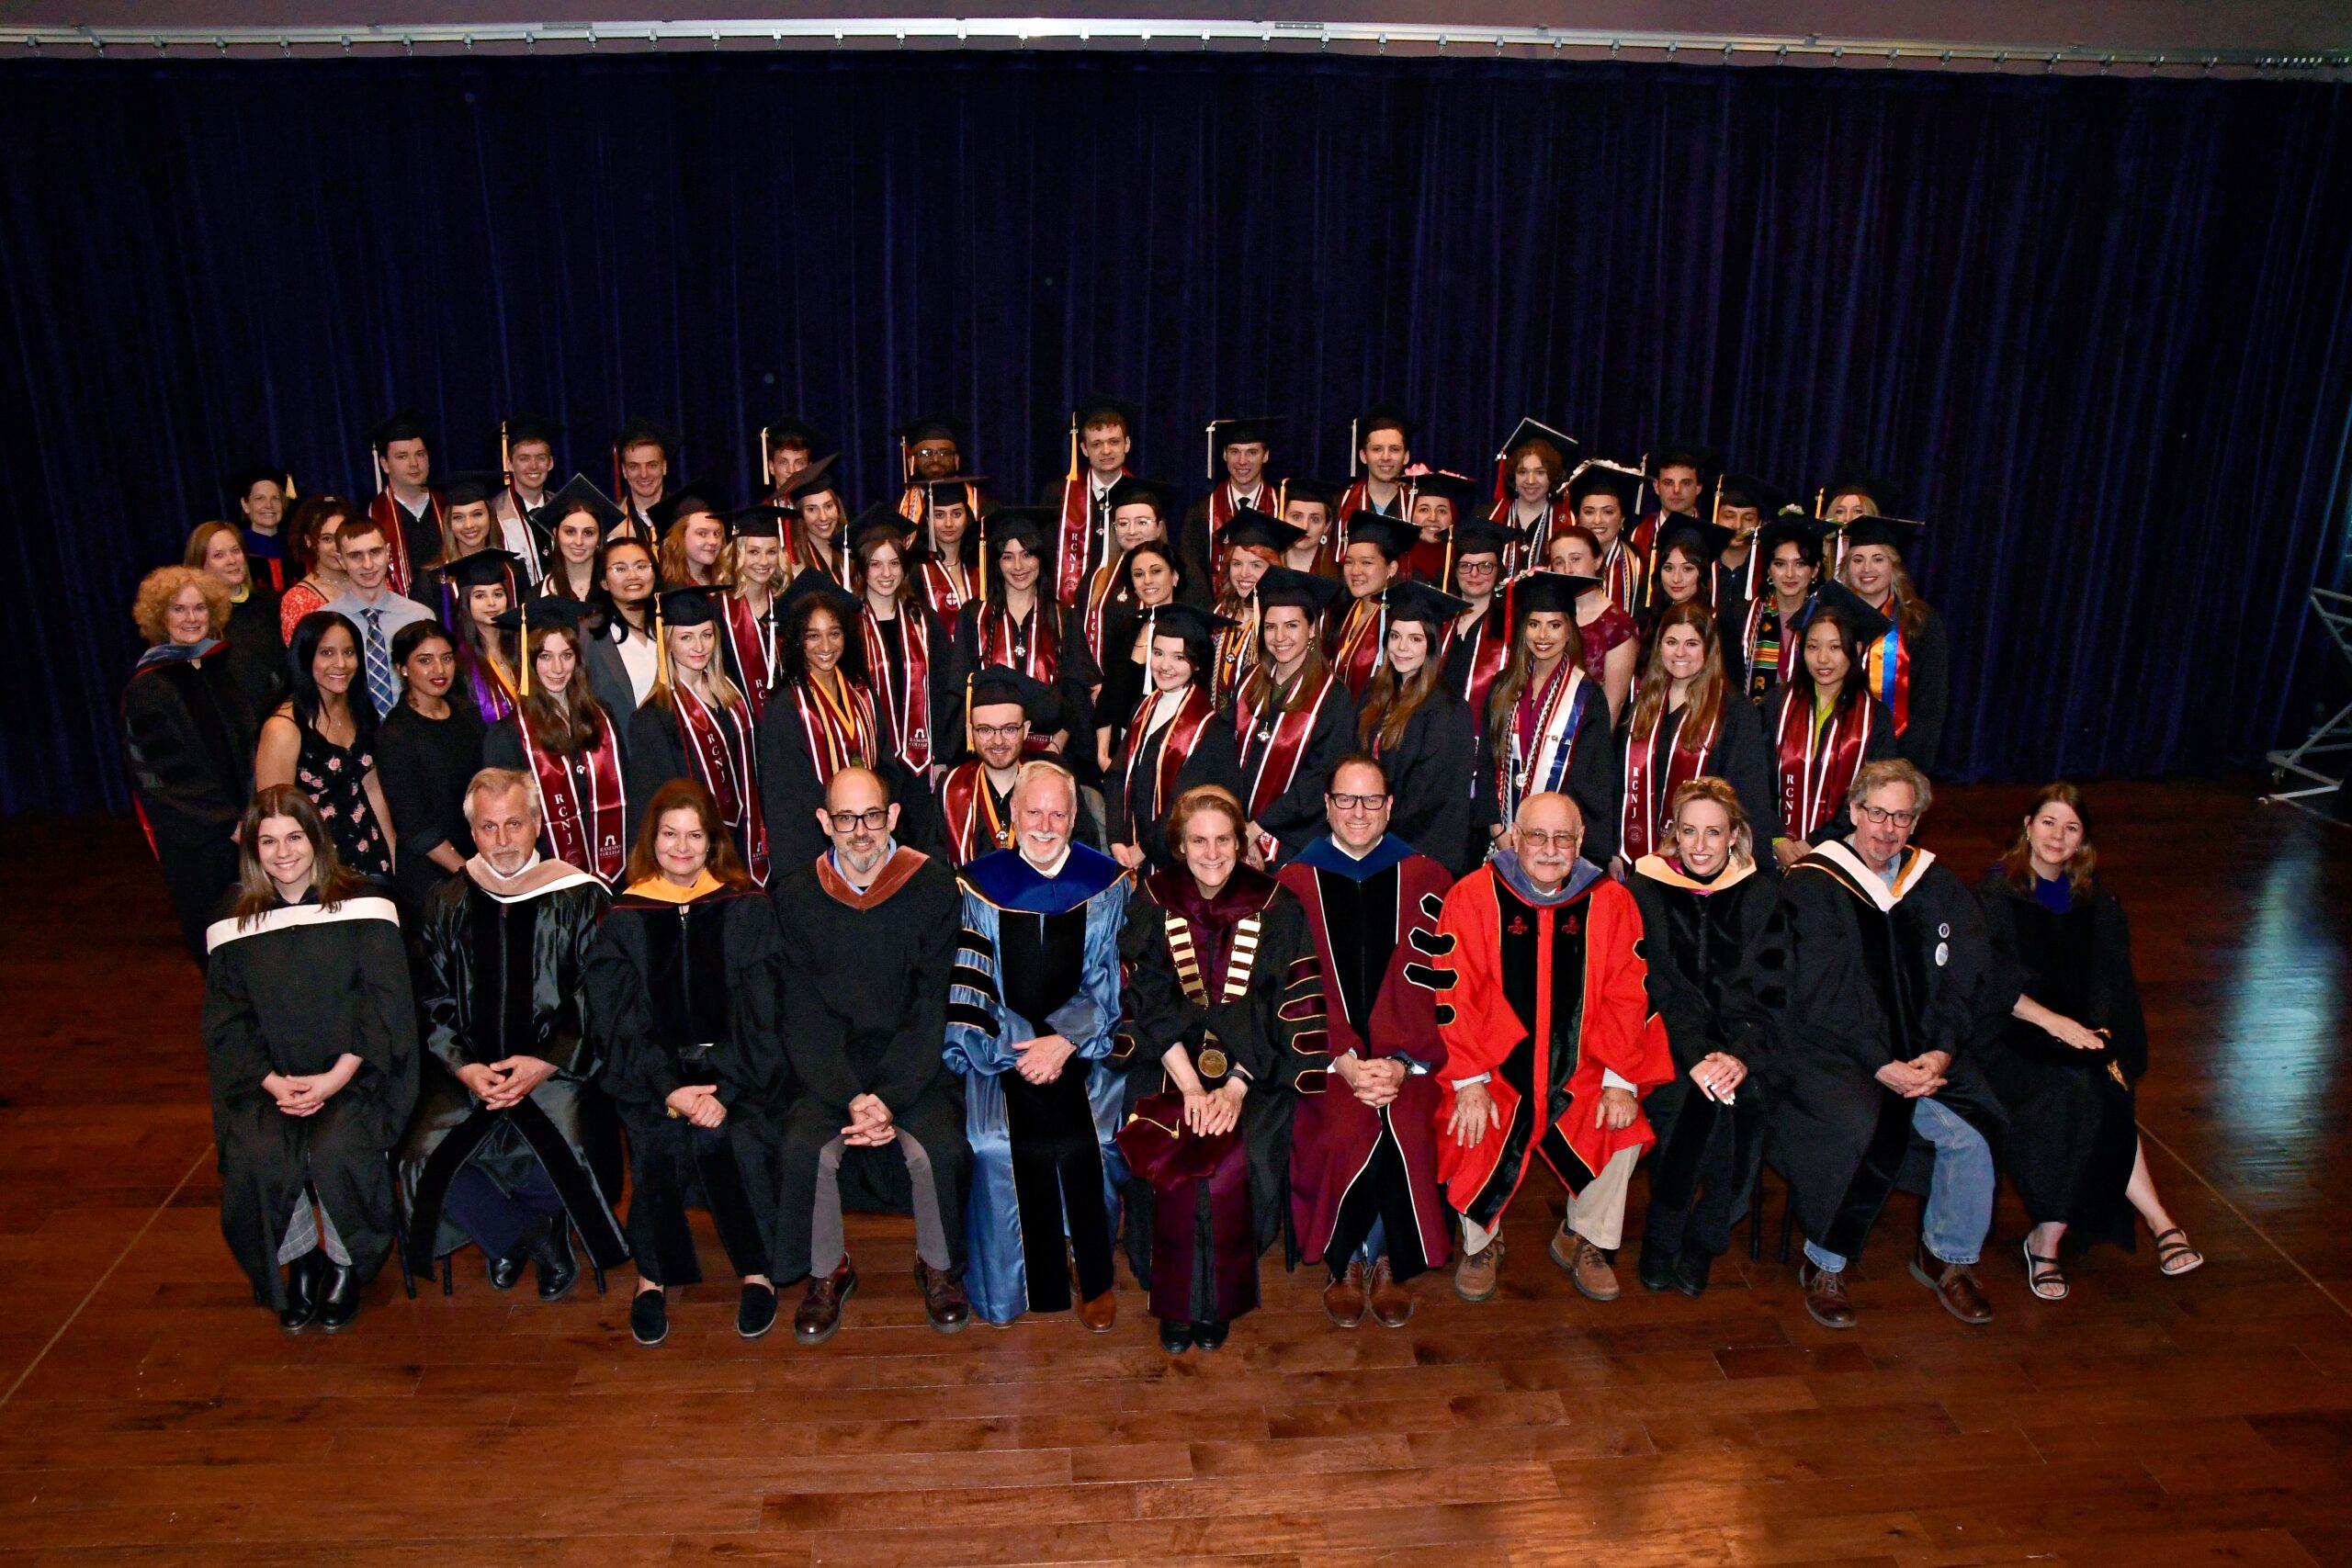 Recipients of the 2023 Academic Achievement Awards with the President, Provost, Deans, and faculty.